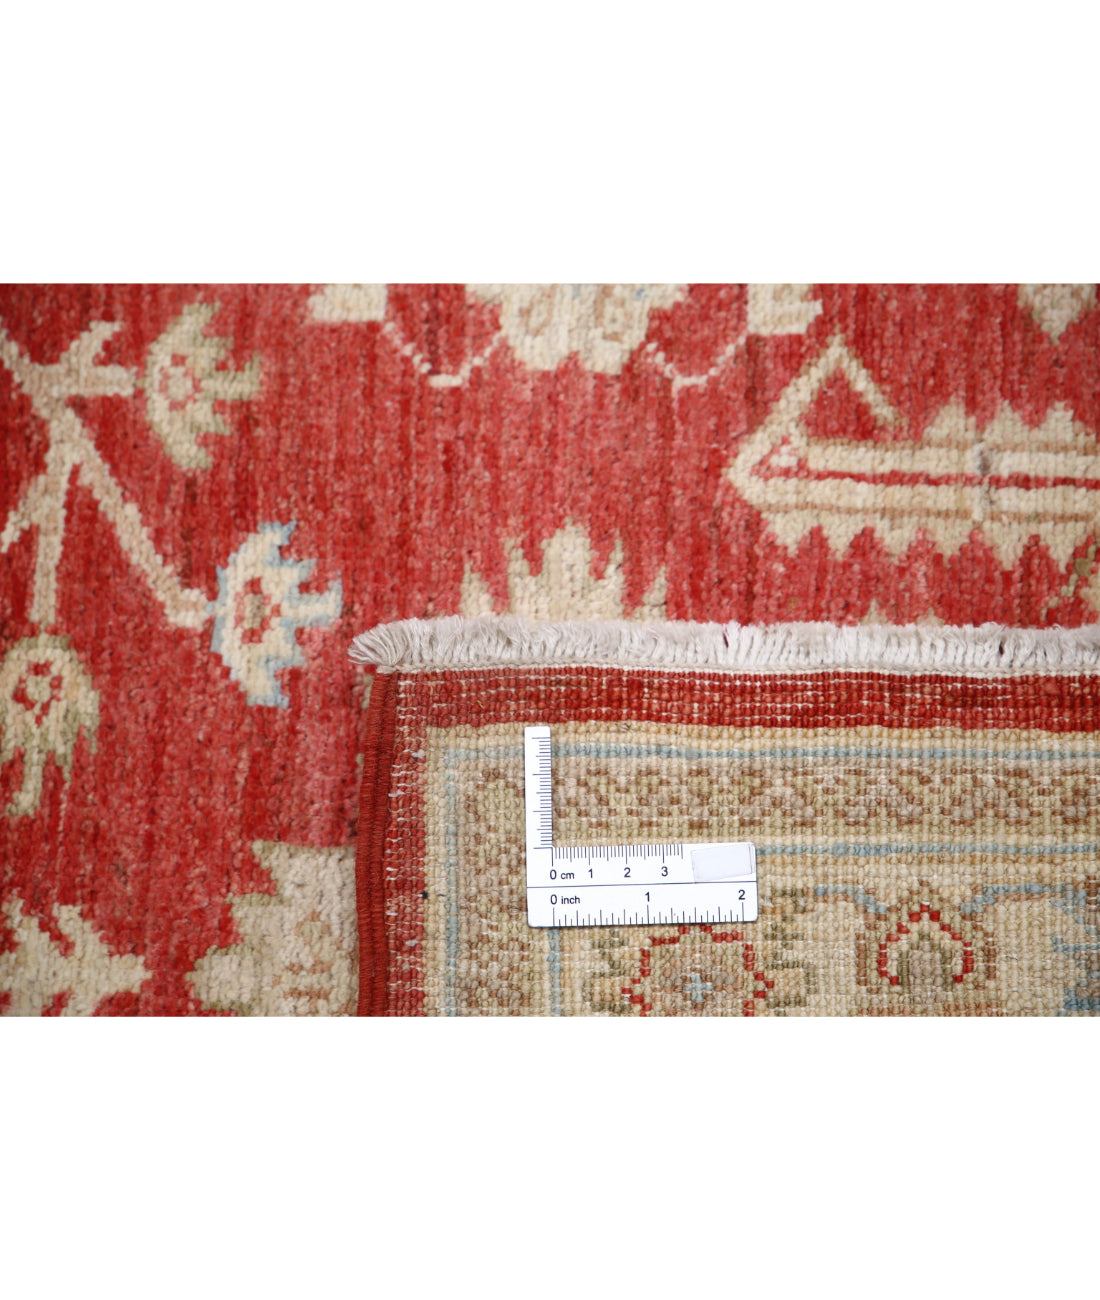 Ziegler 2'7'' X 7'8'' Hand-Knotted Wool Rug 2'7'' x 7'8'' (78 X 230) / Red / Ivory